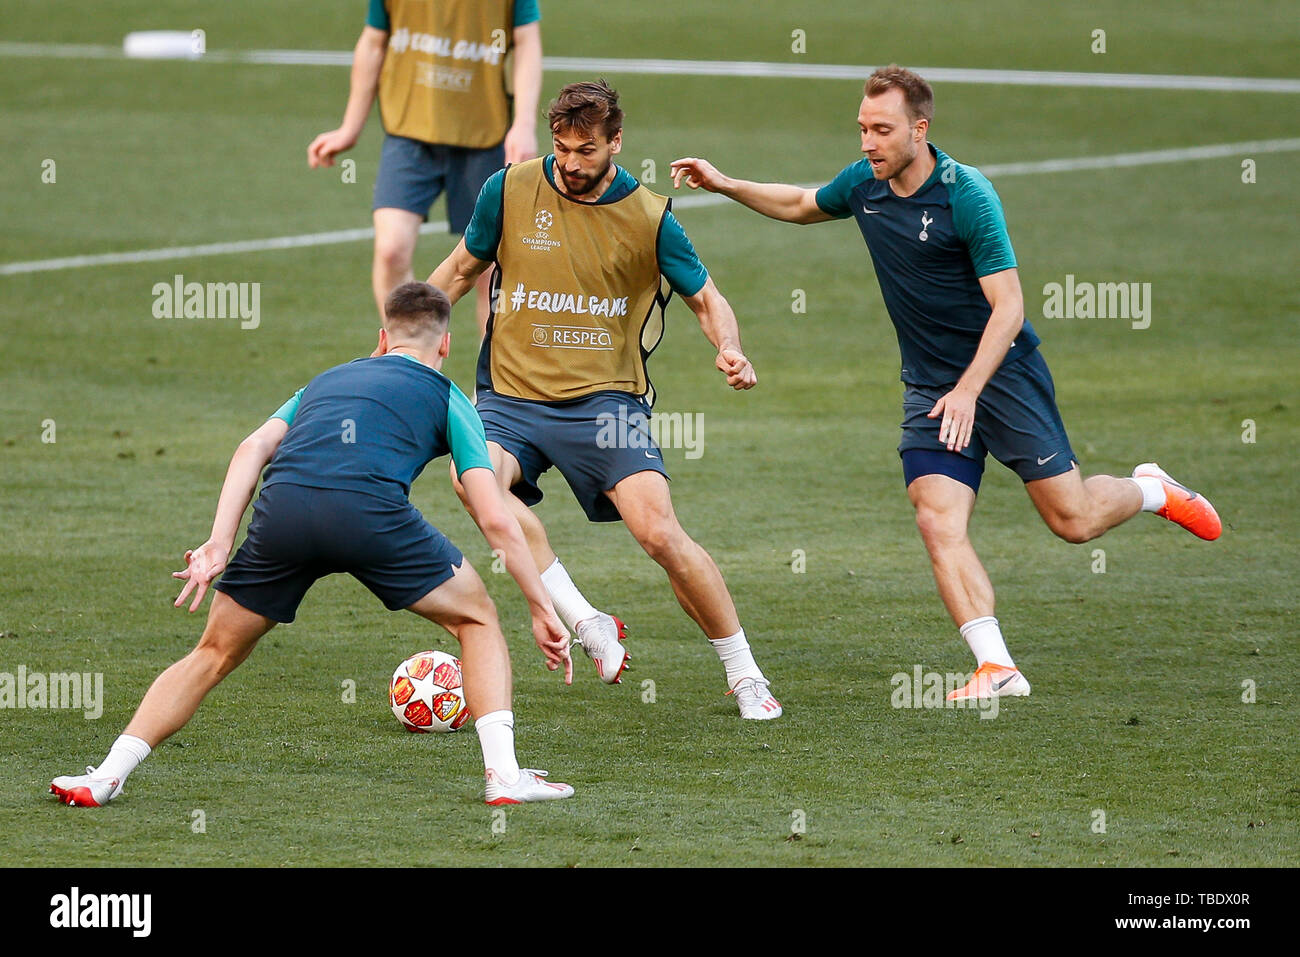 Madrid, Spain. 31st May, 2019. Fernando Llorente of Tottenham Hotspur during a training session prior to the UEFA Champions League Final match between Liverpool and Tottenham Hotspur at Wanda Metropolitano on May 31st 2019 in Madrid, Spain. (Photo by Daniel Chesterton/phcimages.com) Credit: PHC Images/Alamy Live News Stock Photo